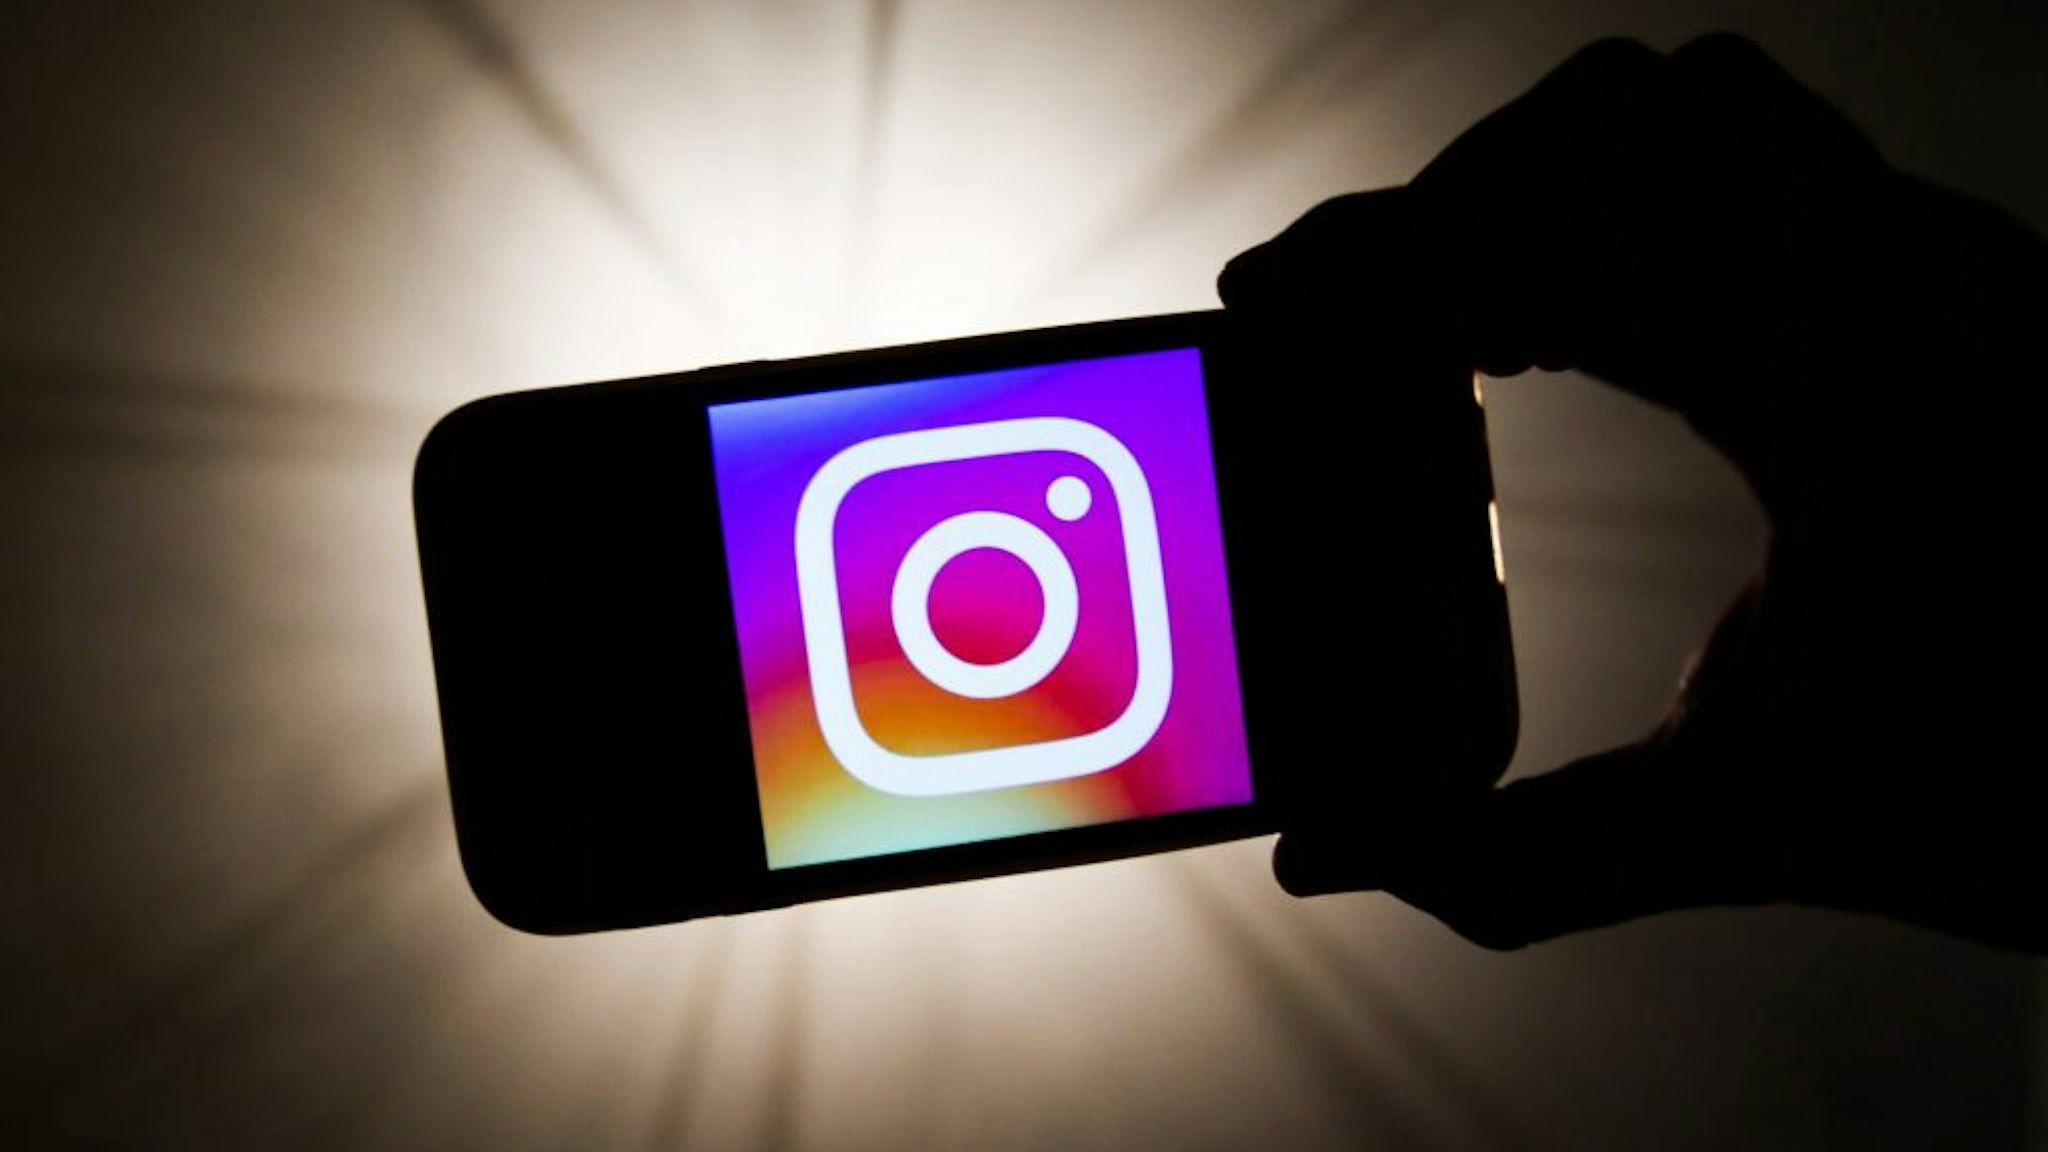 Instagram logo is seen displayed on a phone screen in this illustration photo taken in Krakow, Poland on December 27, 2019.